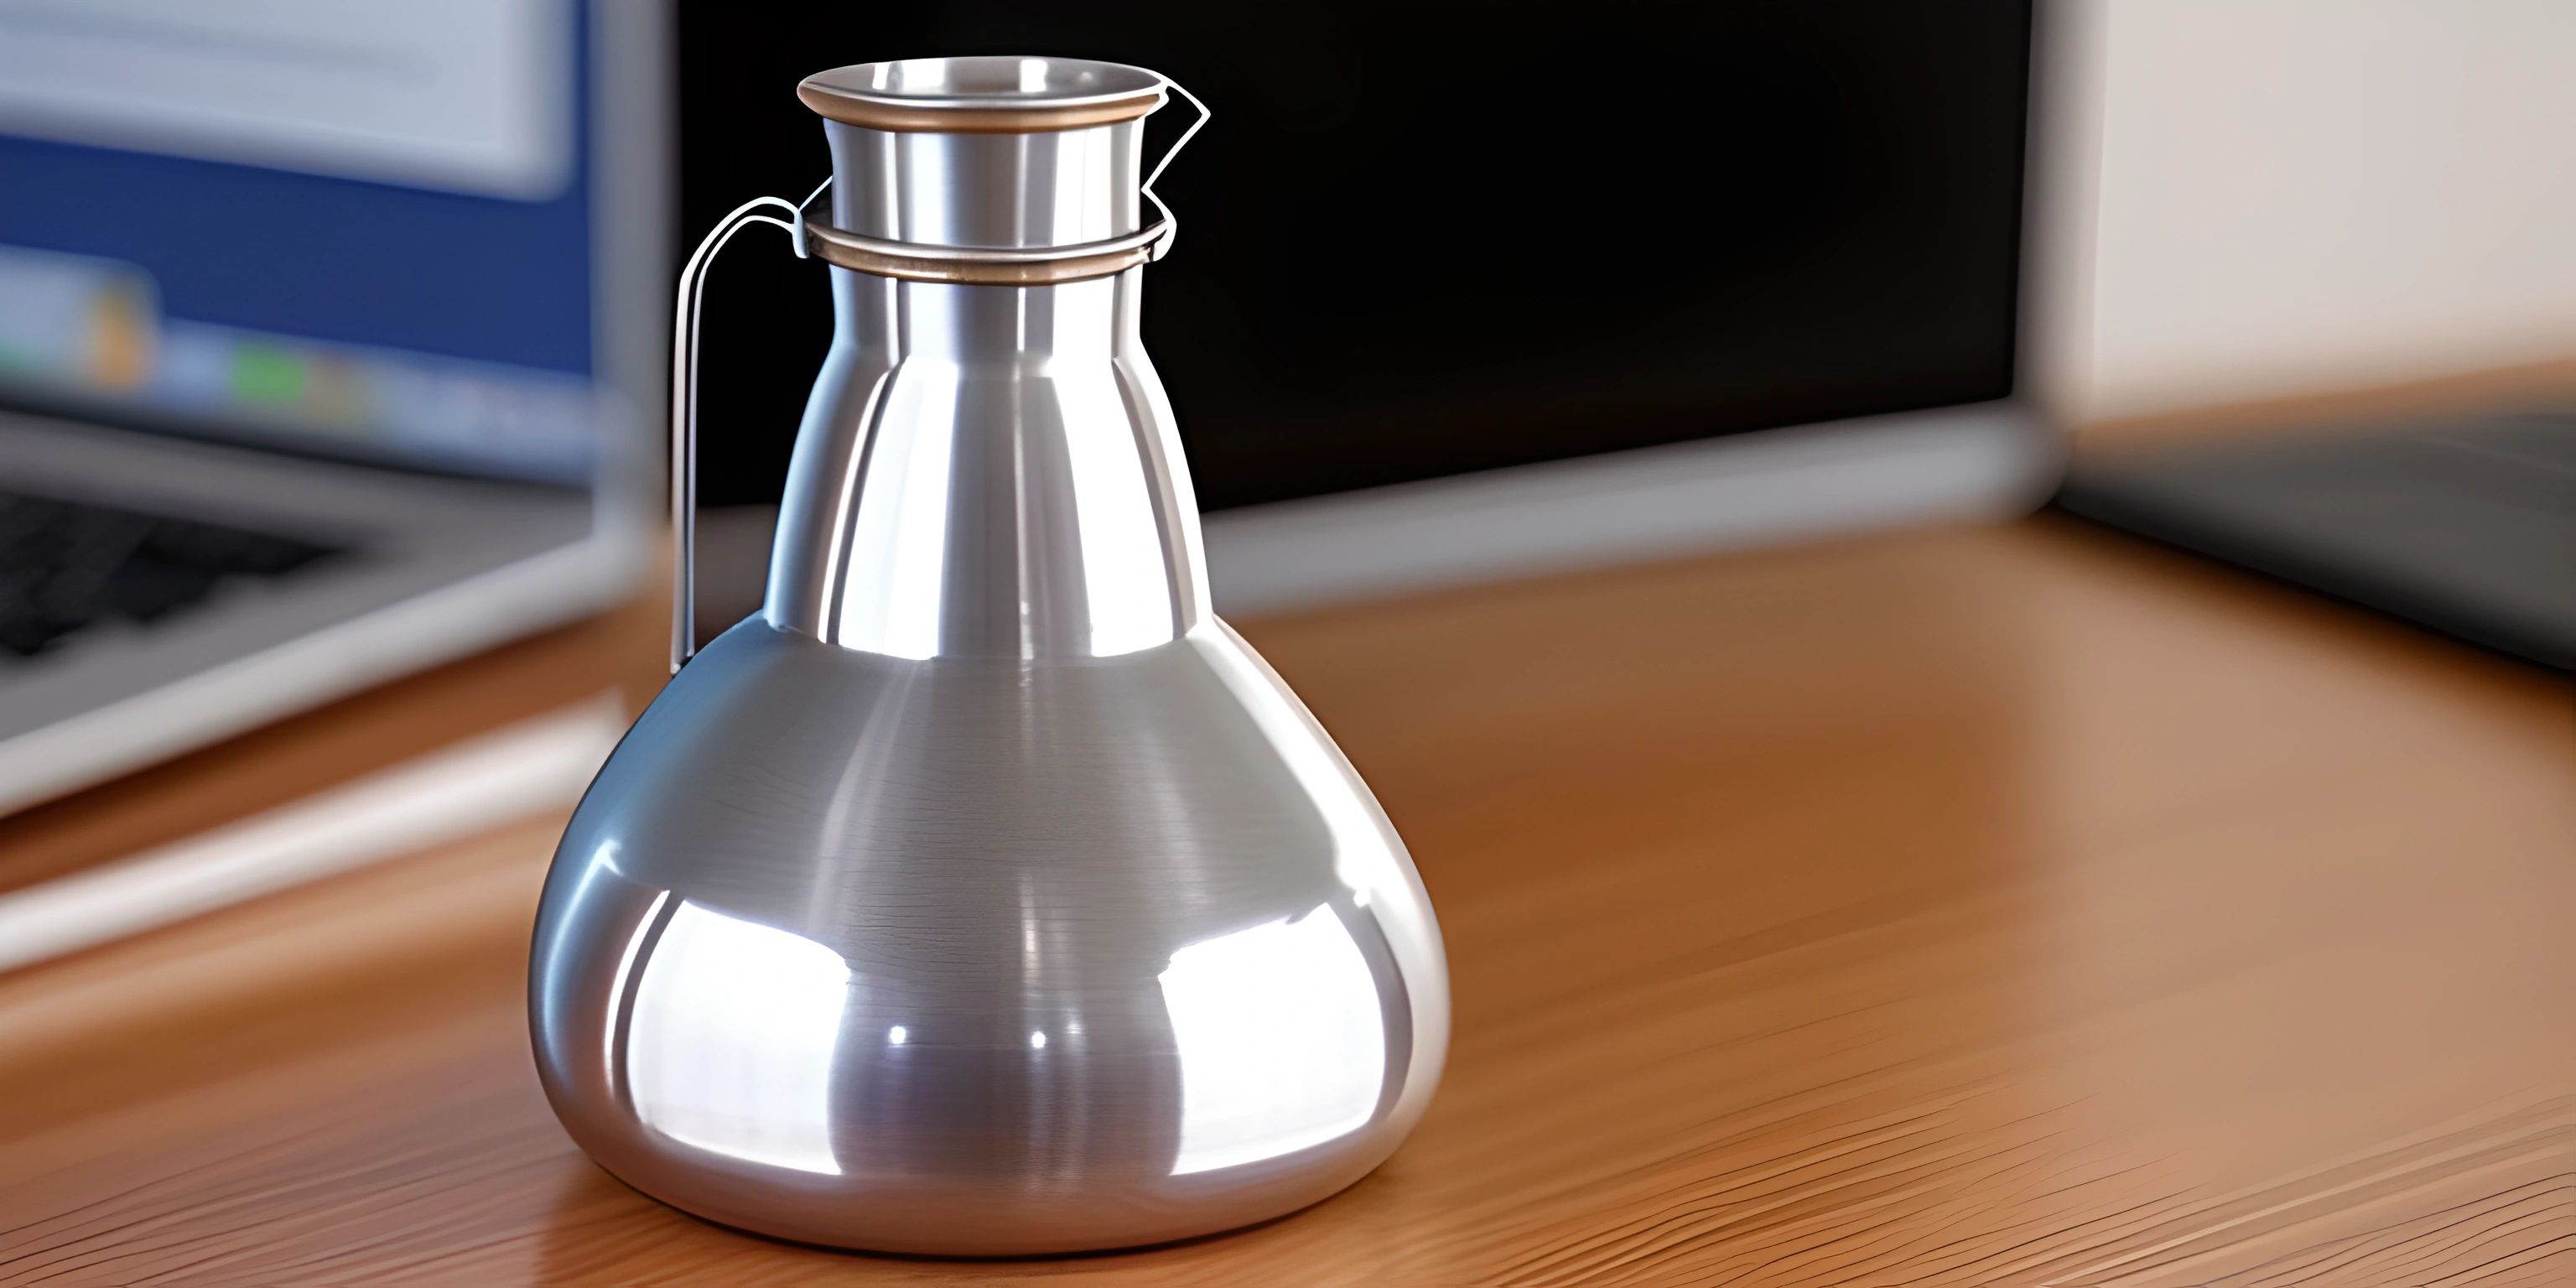 the kettle sits in front of a laptop computer at a desk, a small cup with a lid is on top